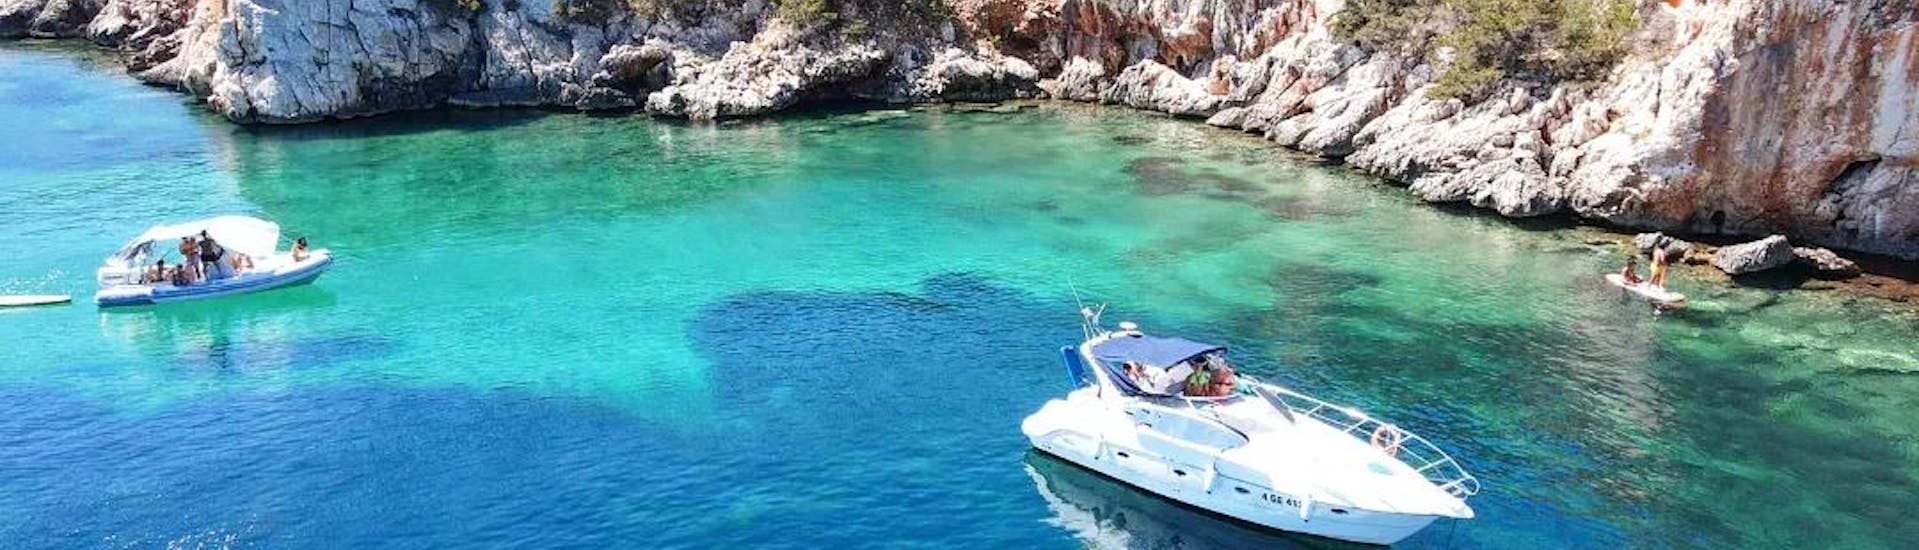 Yacht Trip from Alghero to Porto Conte with Snorkeling & Lunch.